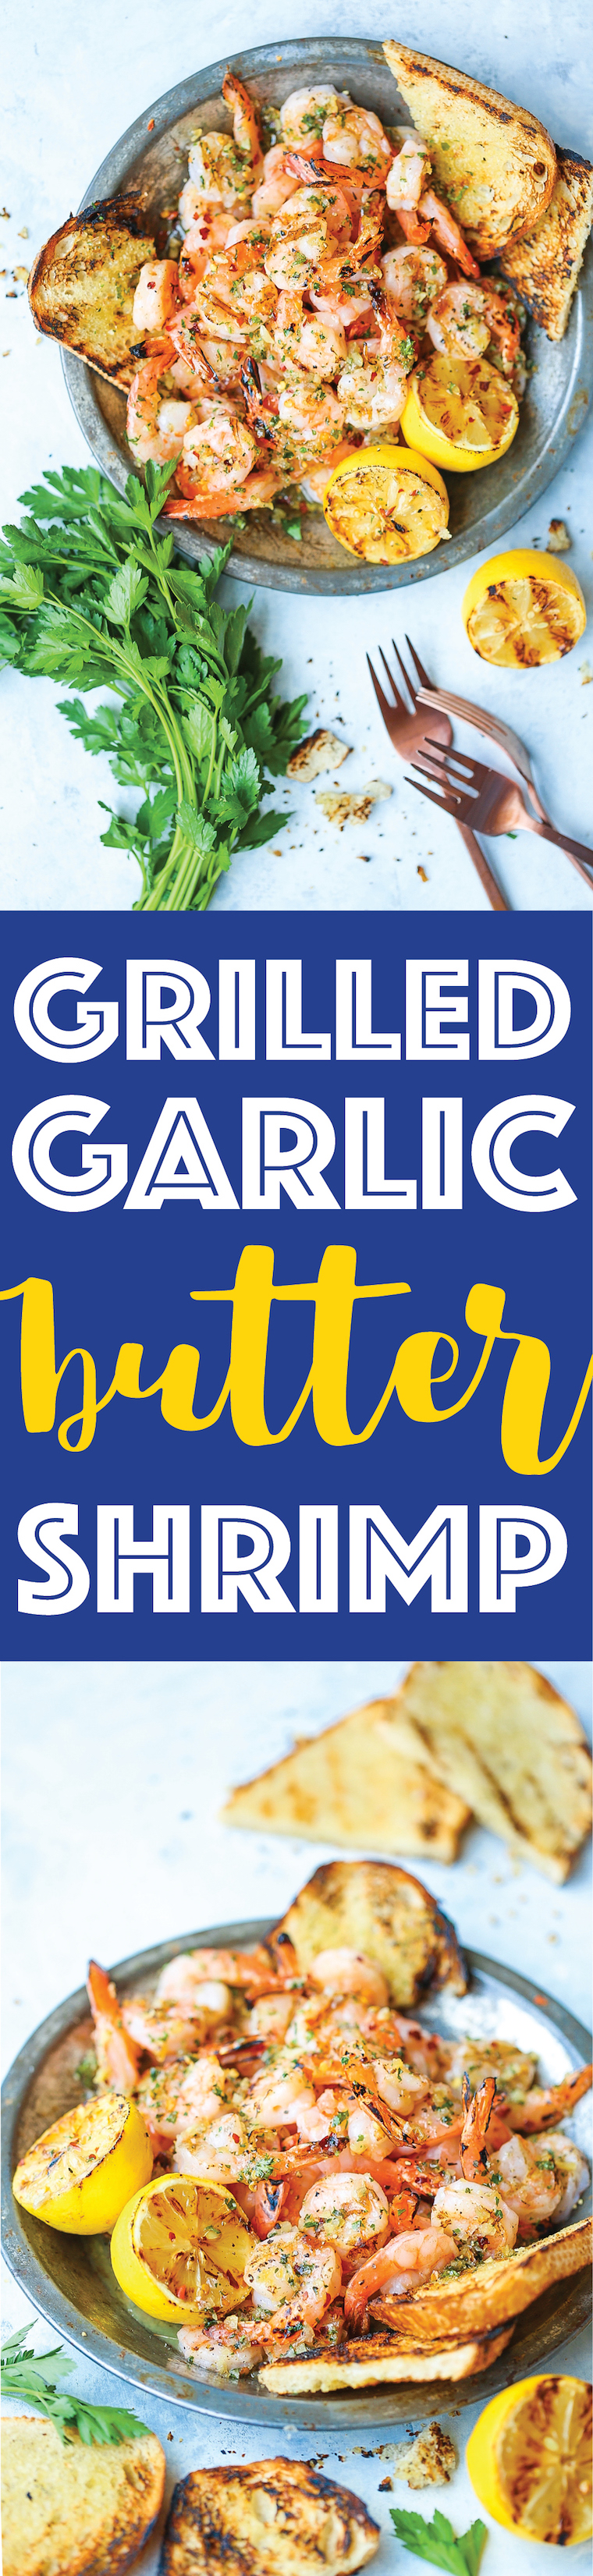 Grilled Garlic Butter Shrimp - The lemon garlic butter sauce is simply perfect! Pair with a glass of wine and crusty bread for the best 30 min meal ever!